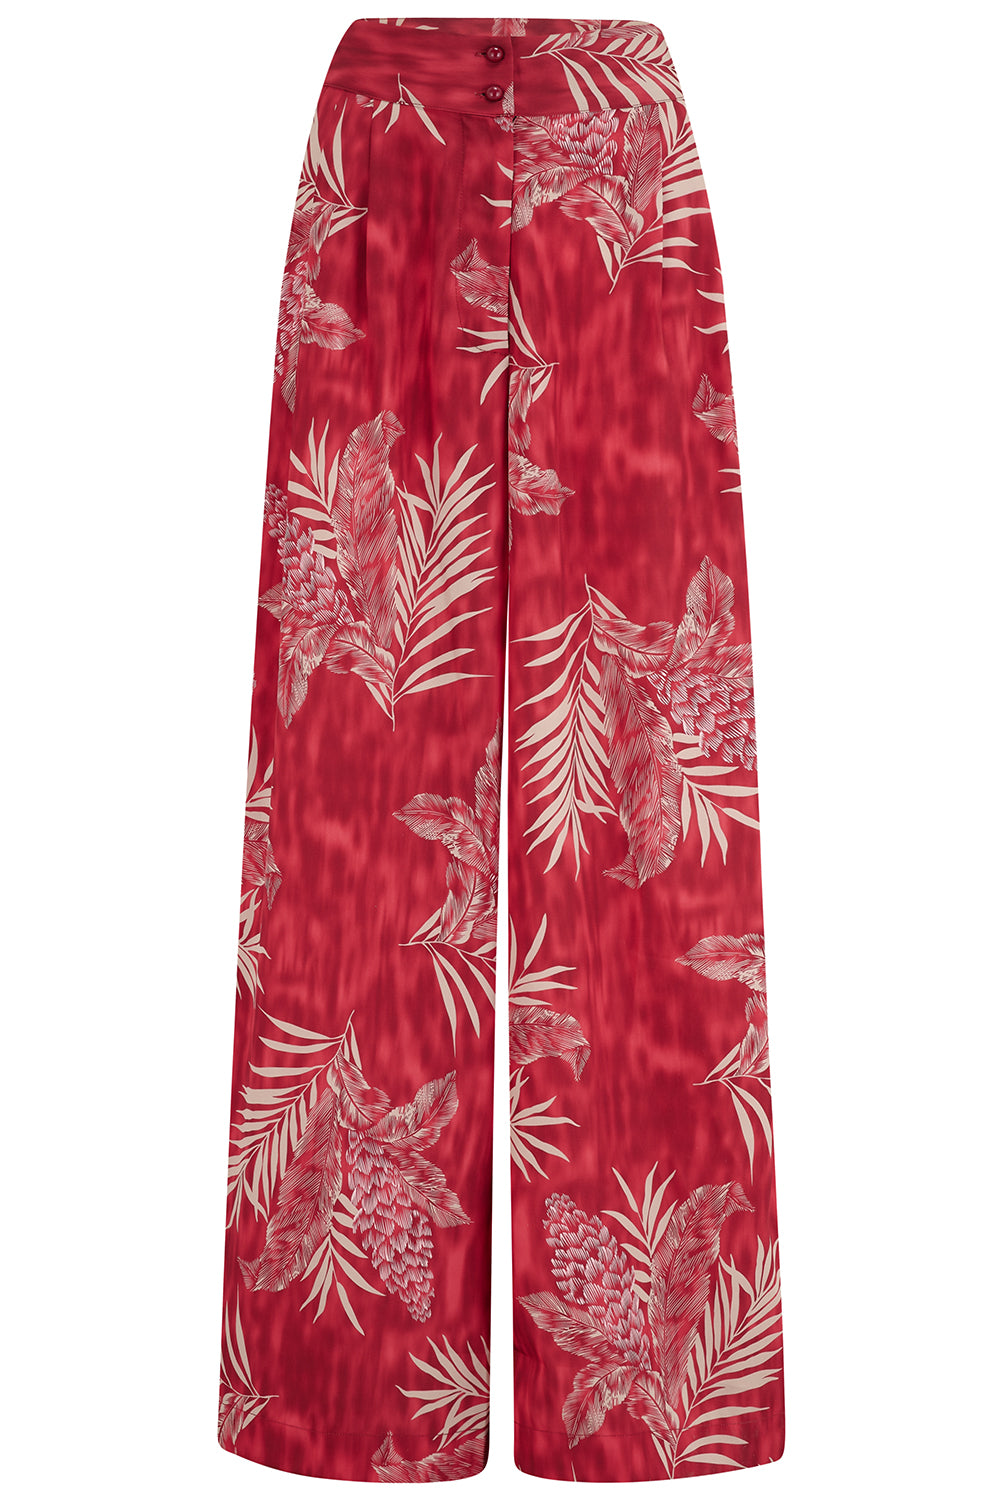 Vintage Wide Leg Pants & Beach Pajamas History The Sophia Palazzo Wide Leg Trousers in Ruby Palm Print Easy To Wear Vintage Inspired Style £39.95 AT vintagedancer.com